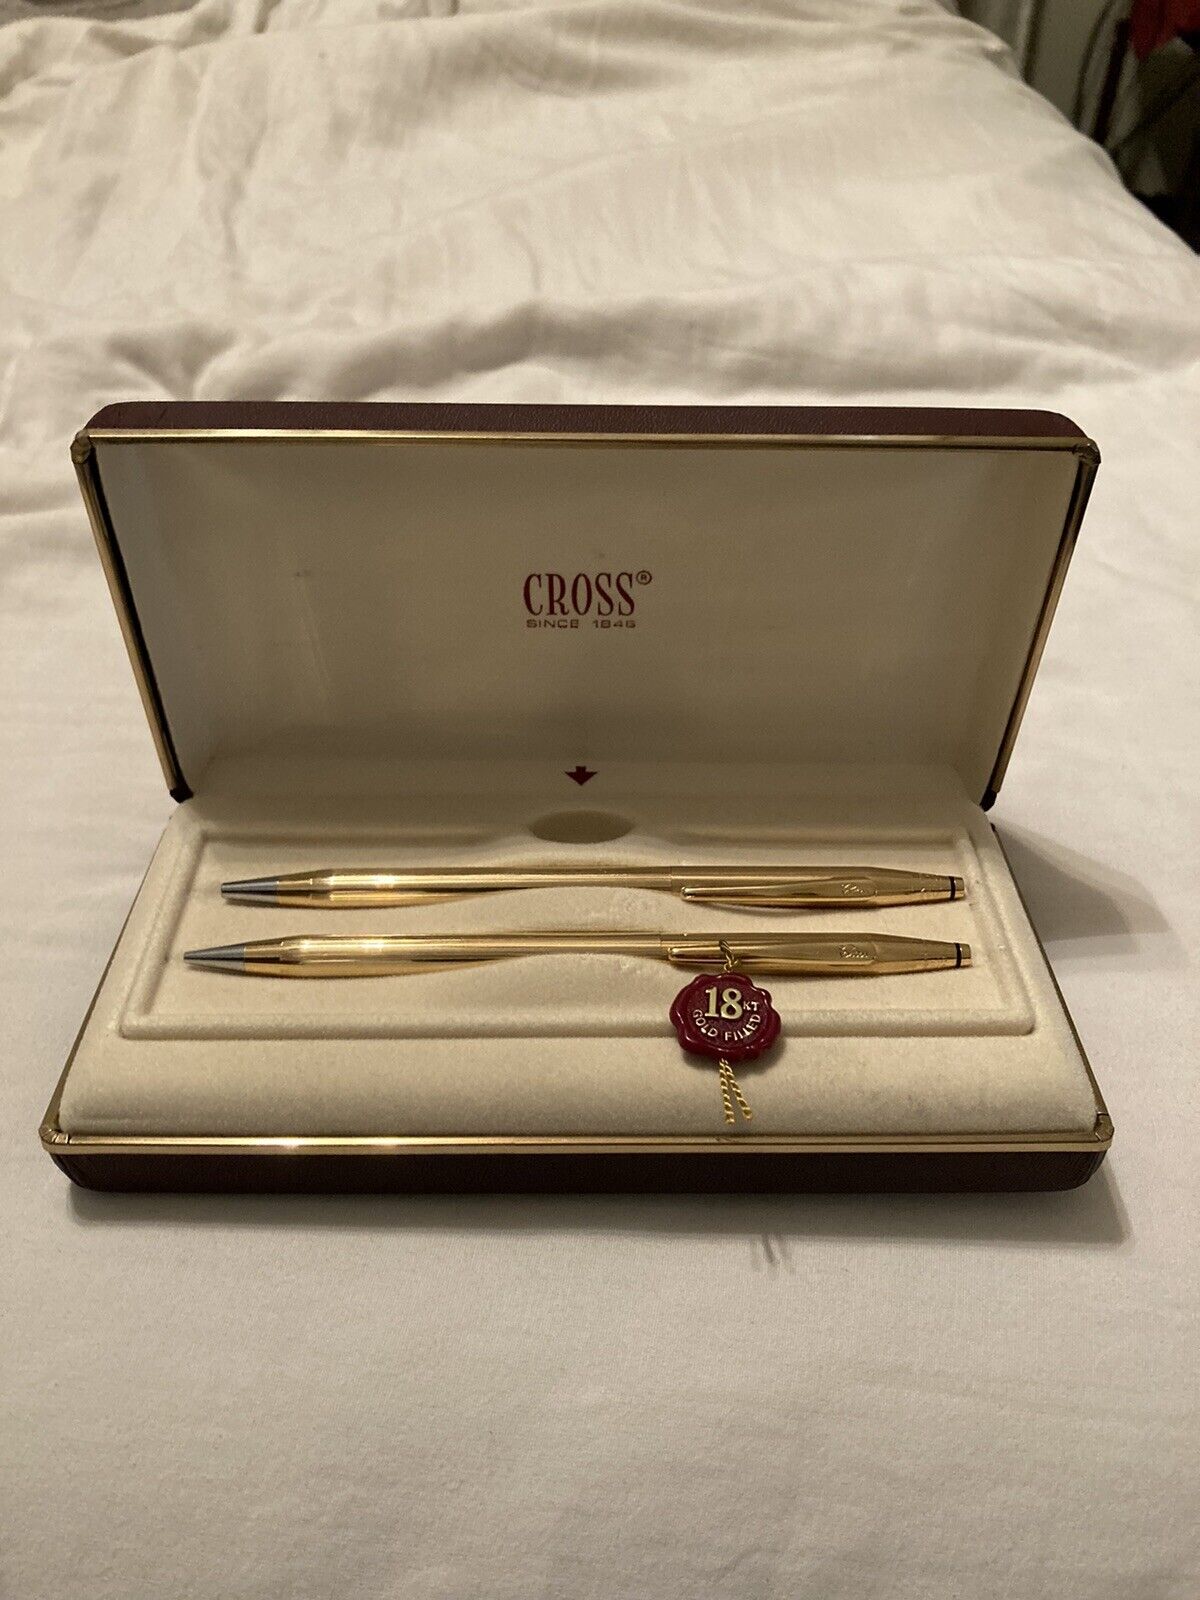 Cross Century 18k Gold Filled Ballpoint Pen & Pencil Set New In Box Made In Usa.